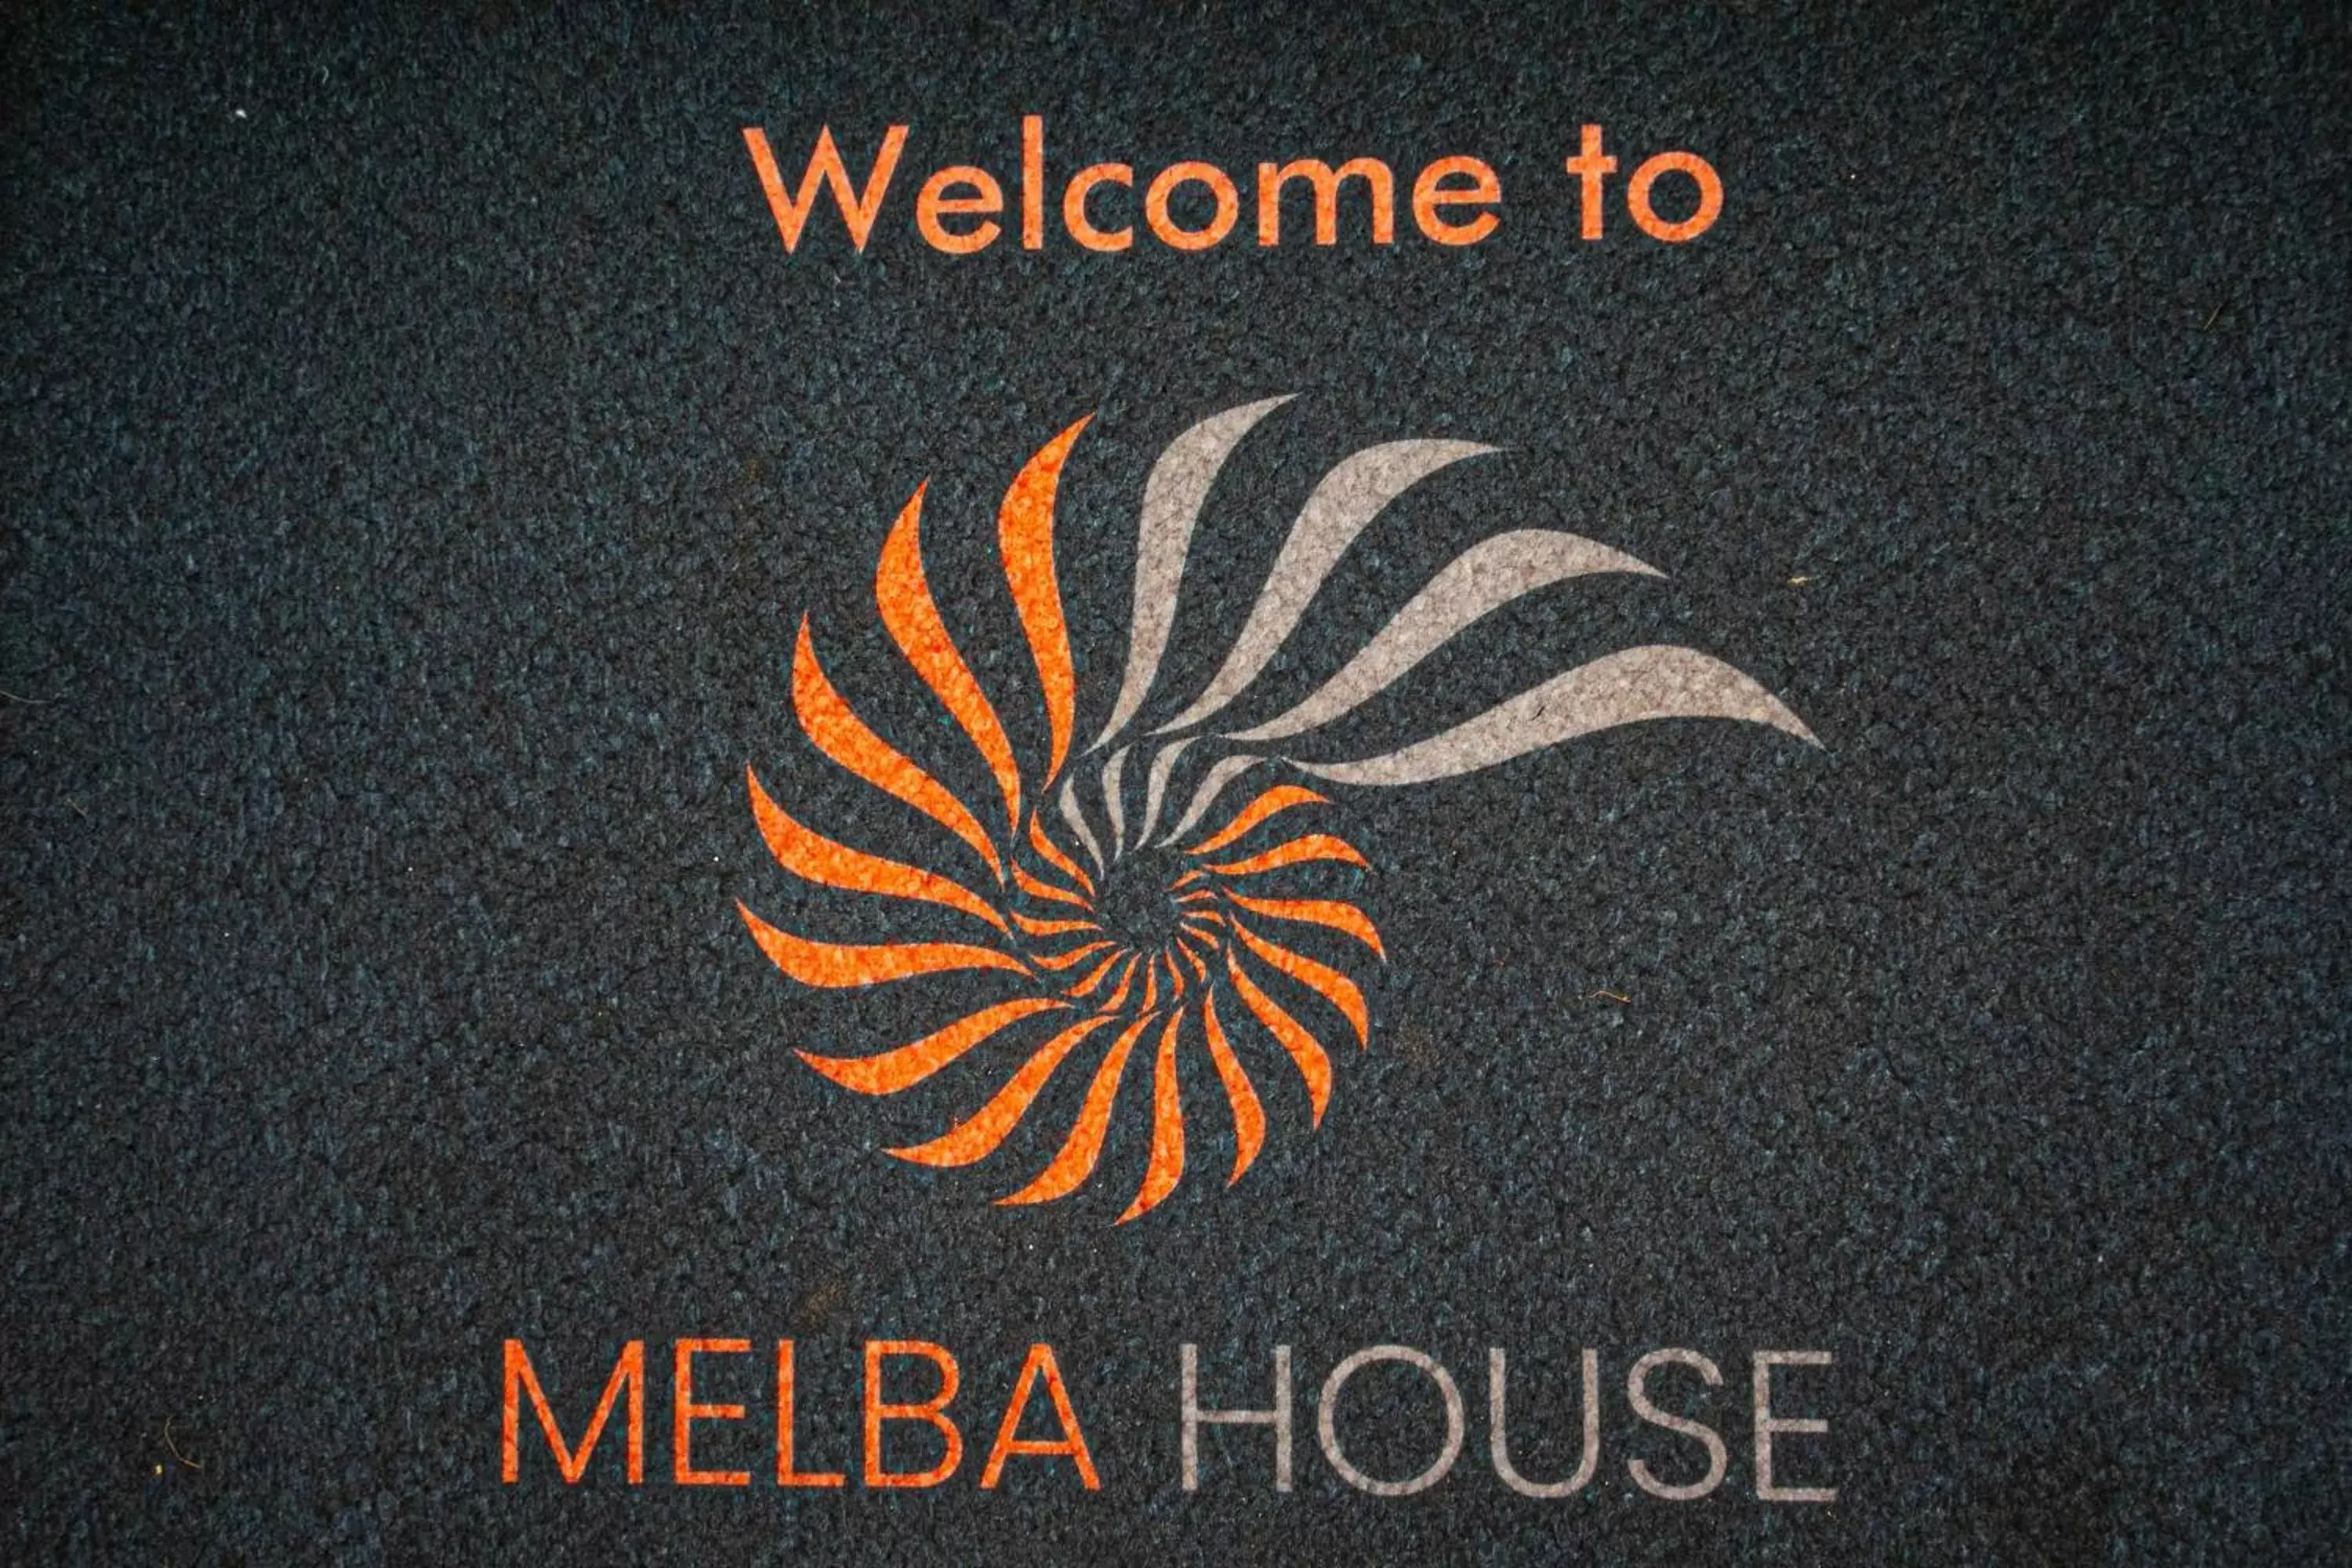 Property logo or sign in Melba House